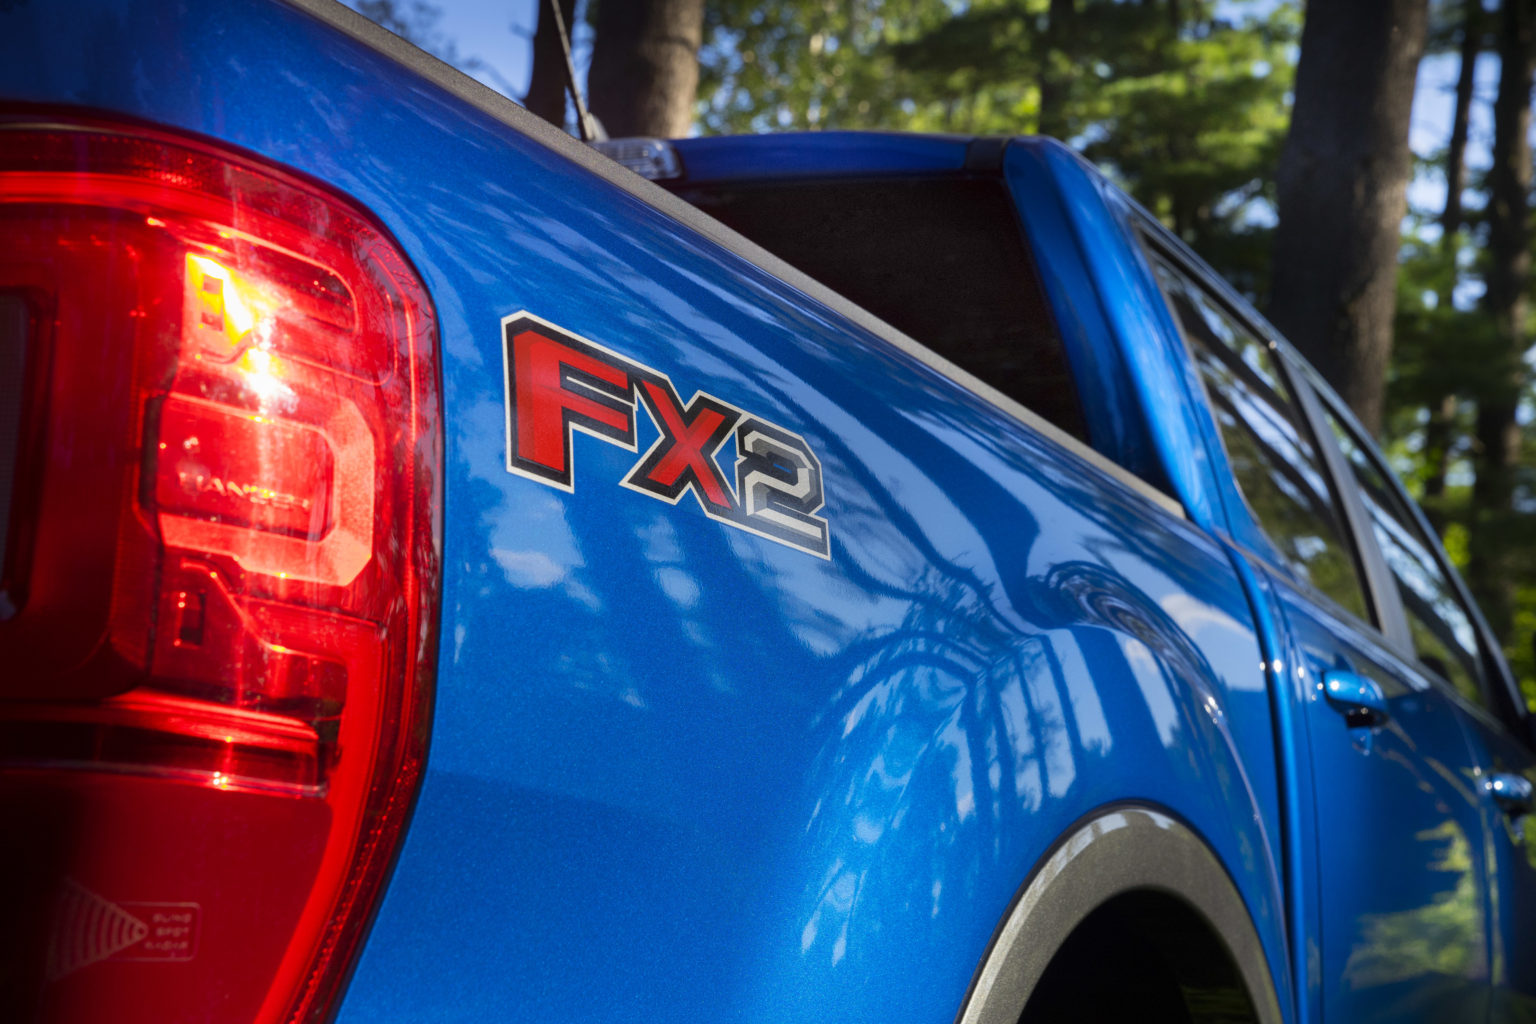 Ford is giving its Range midsize truck new off-road capability with the FX2 Package.